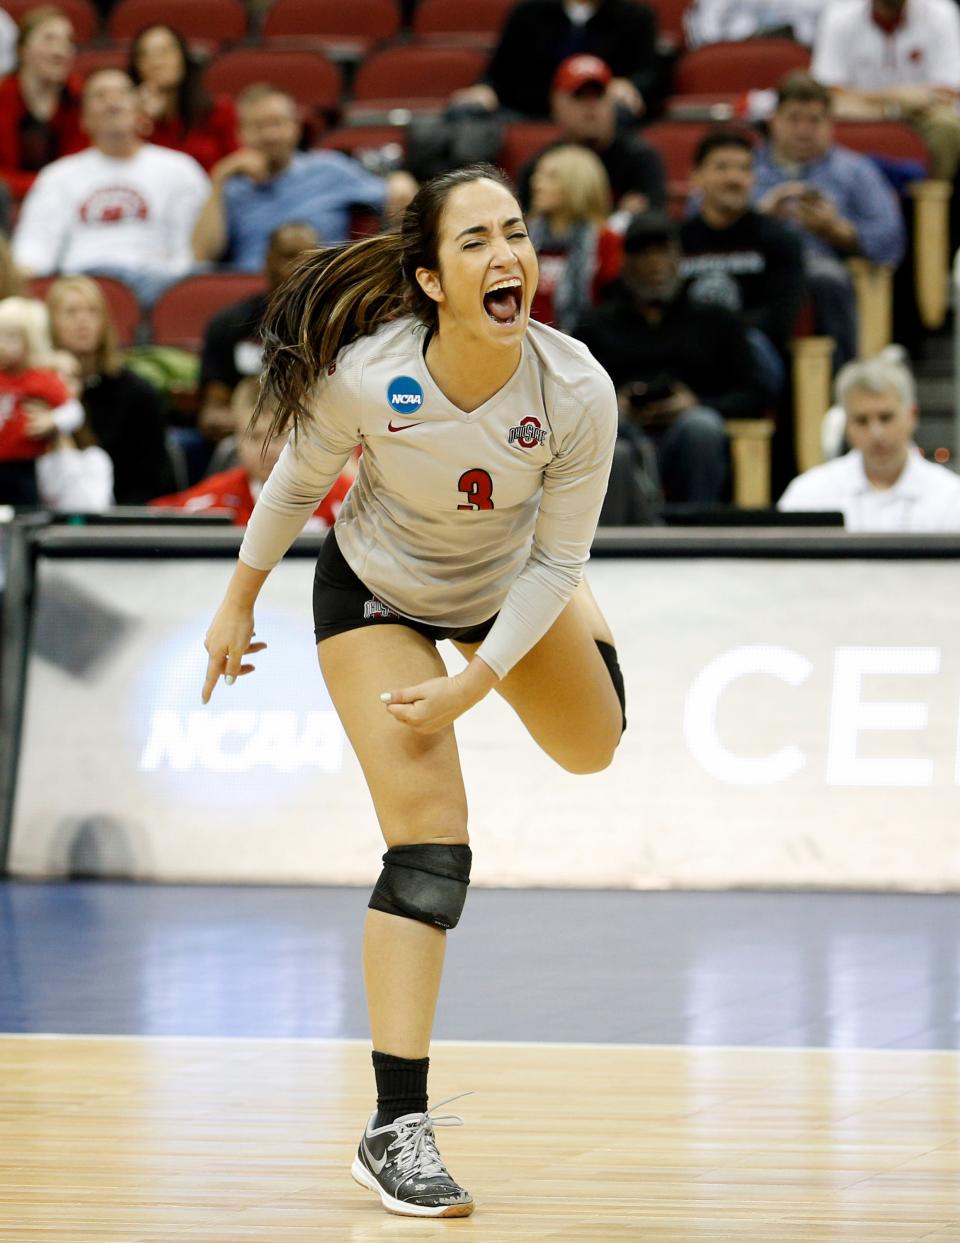 Ohio State's Valeria Leon celebrates after the Buckeyes registered a kill against the Badgers.  Dec. 12, 2014